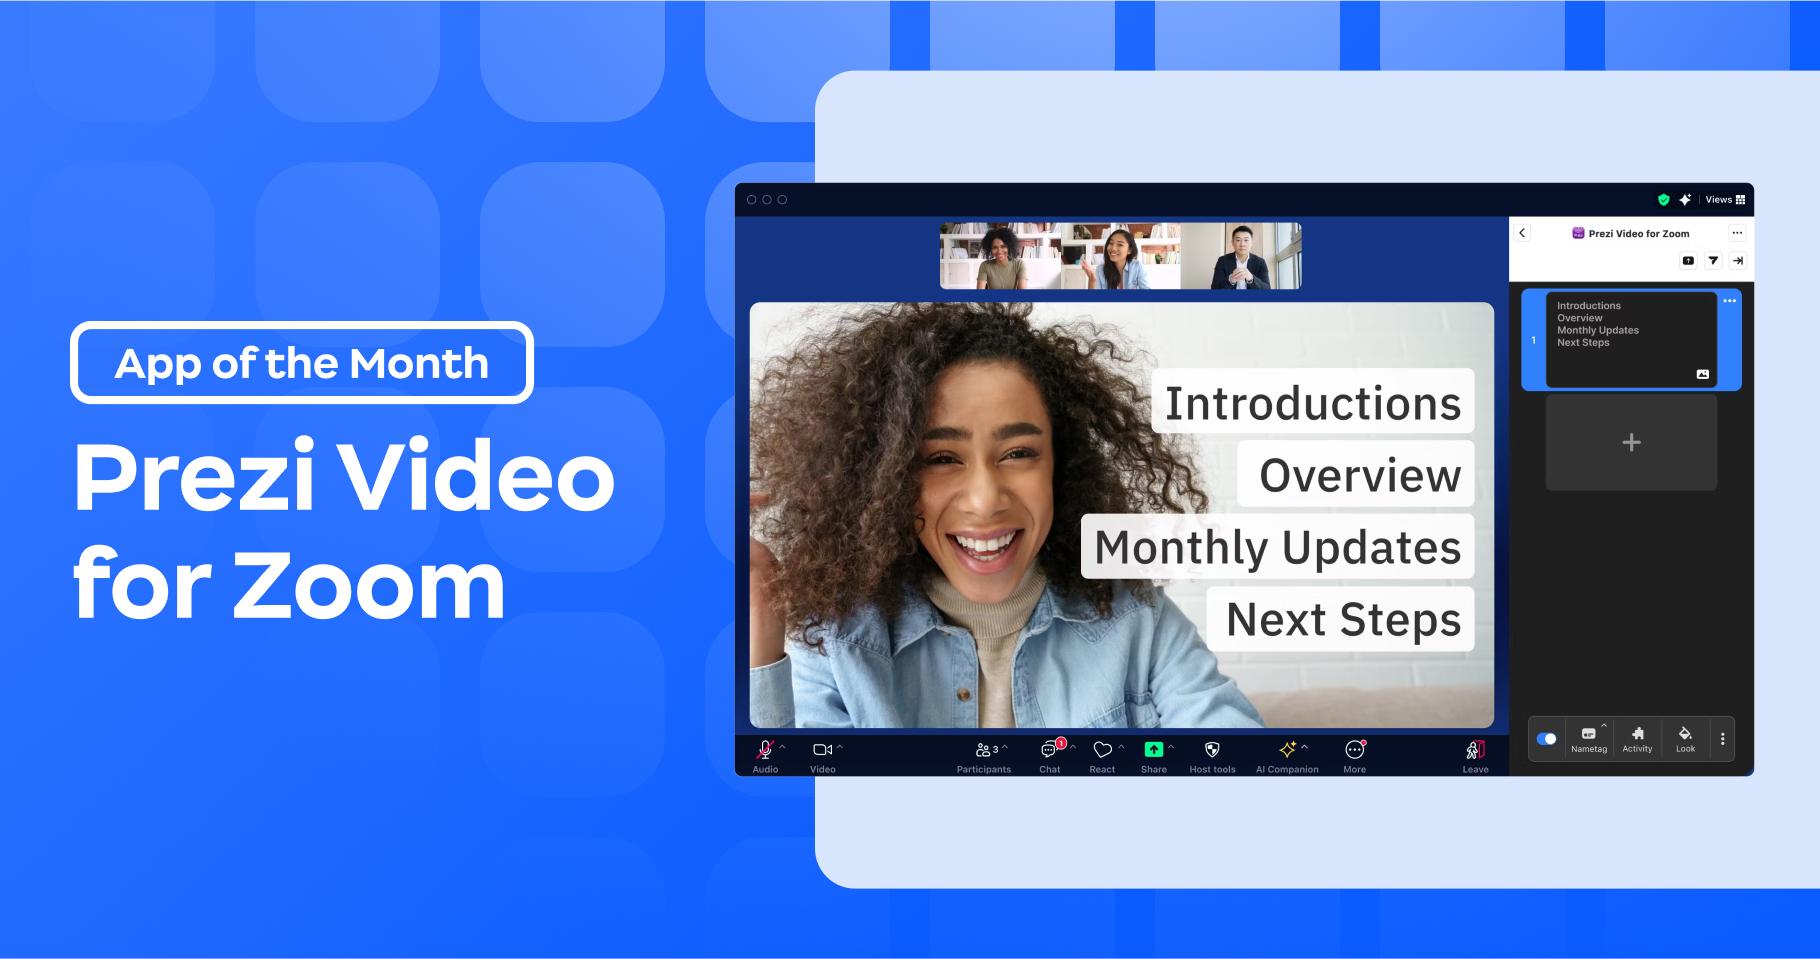 Make meetings more engaging and interactive with Prezi Video for Zoom